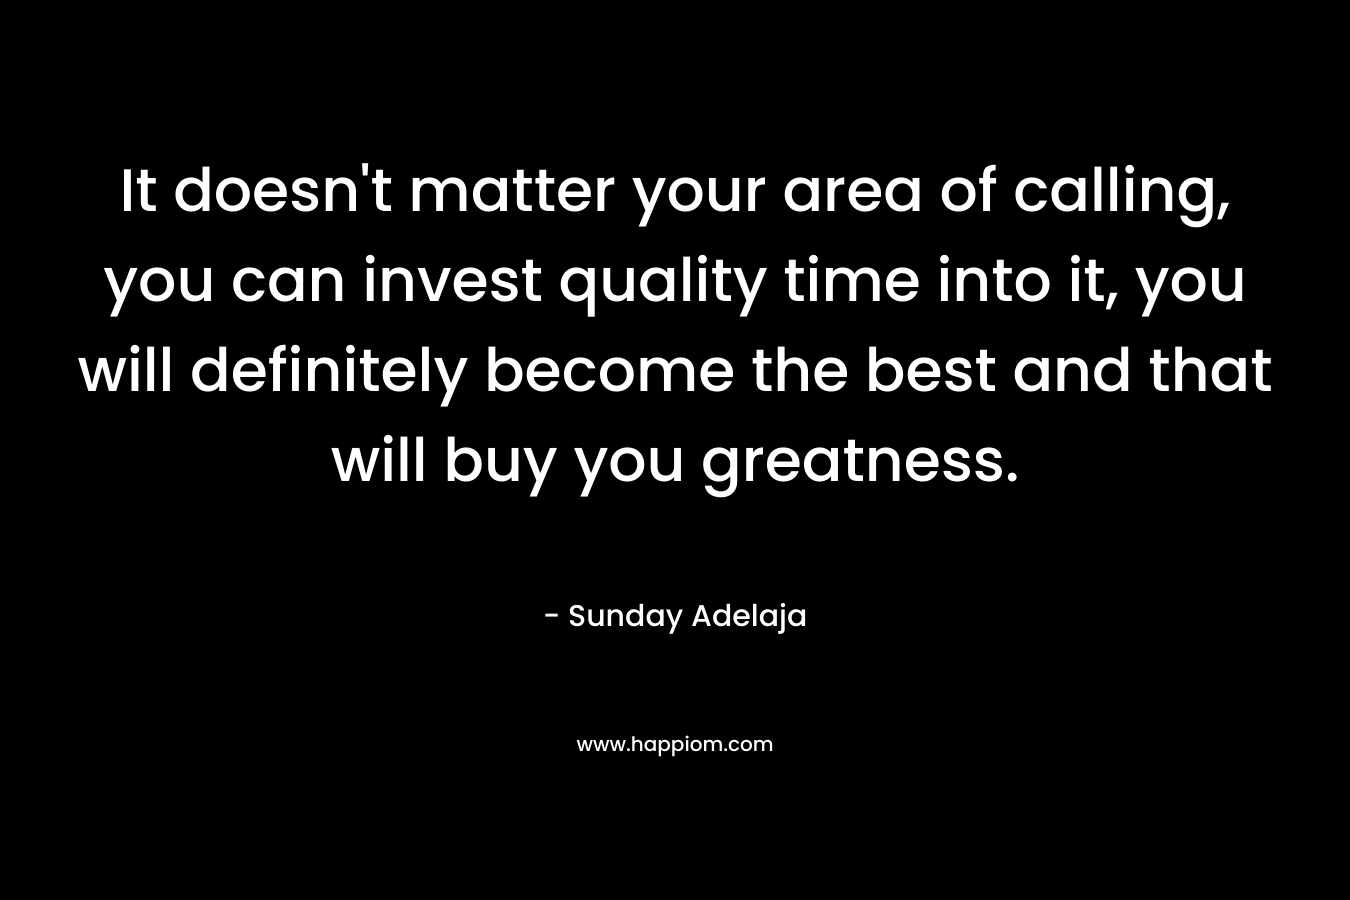 It doesn't matter your area of calling, you can invest quality time into it, you will definitely become the best and that will buy you greatness.